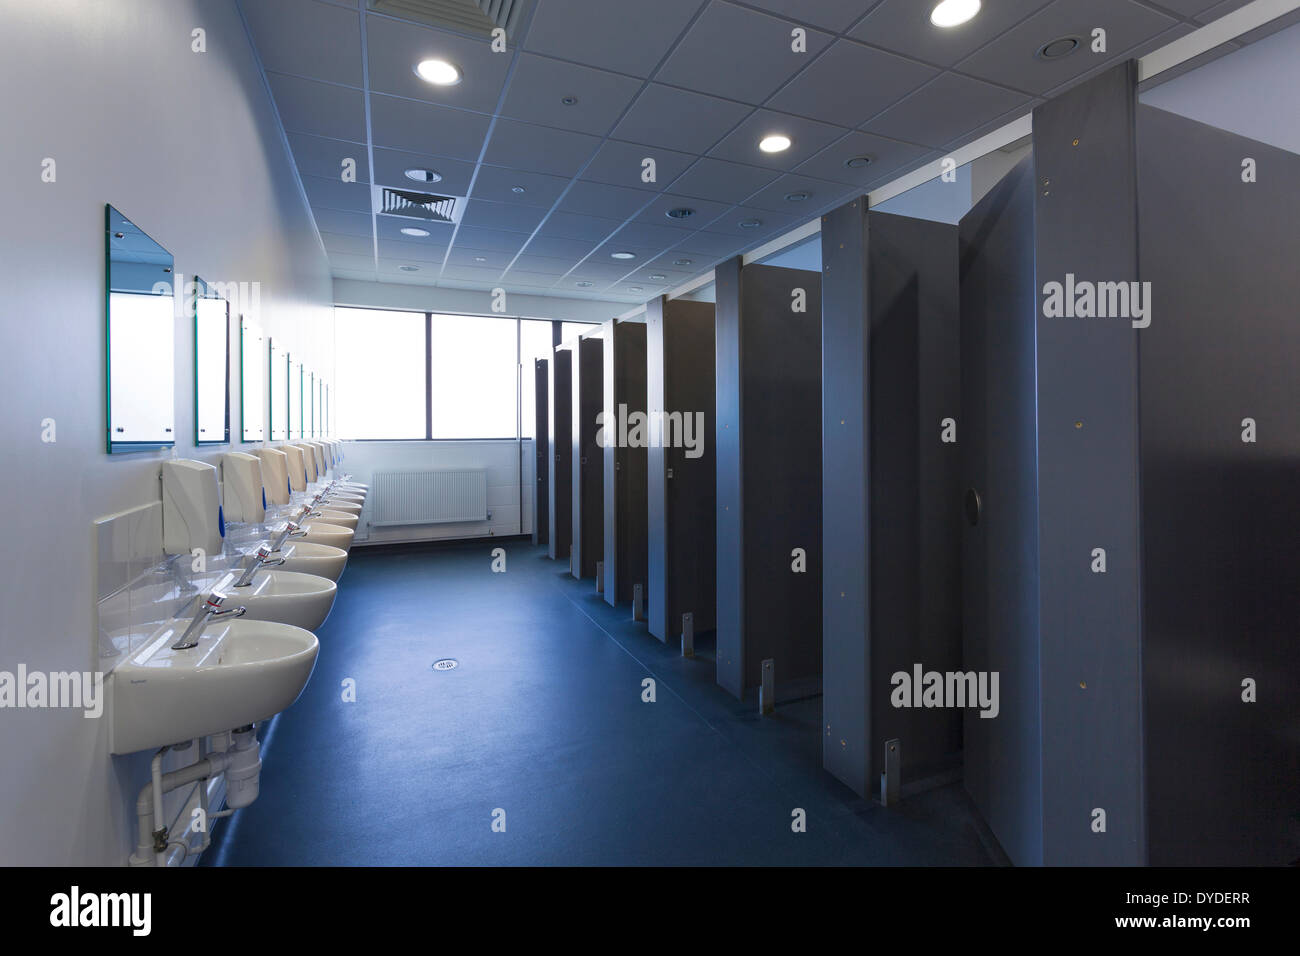 Unoccupied female public toilets with wash basins and cubicles. Stock Photo